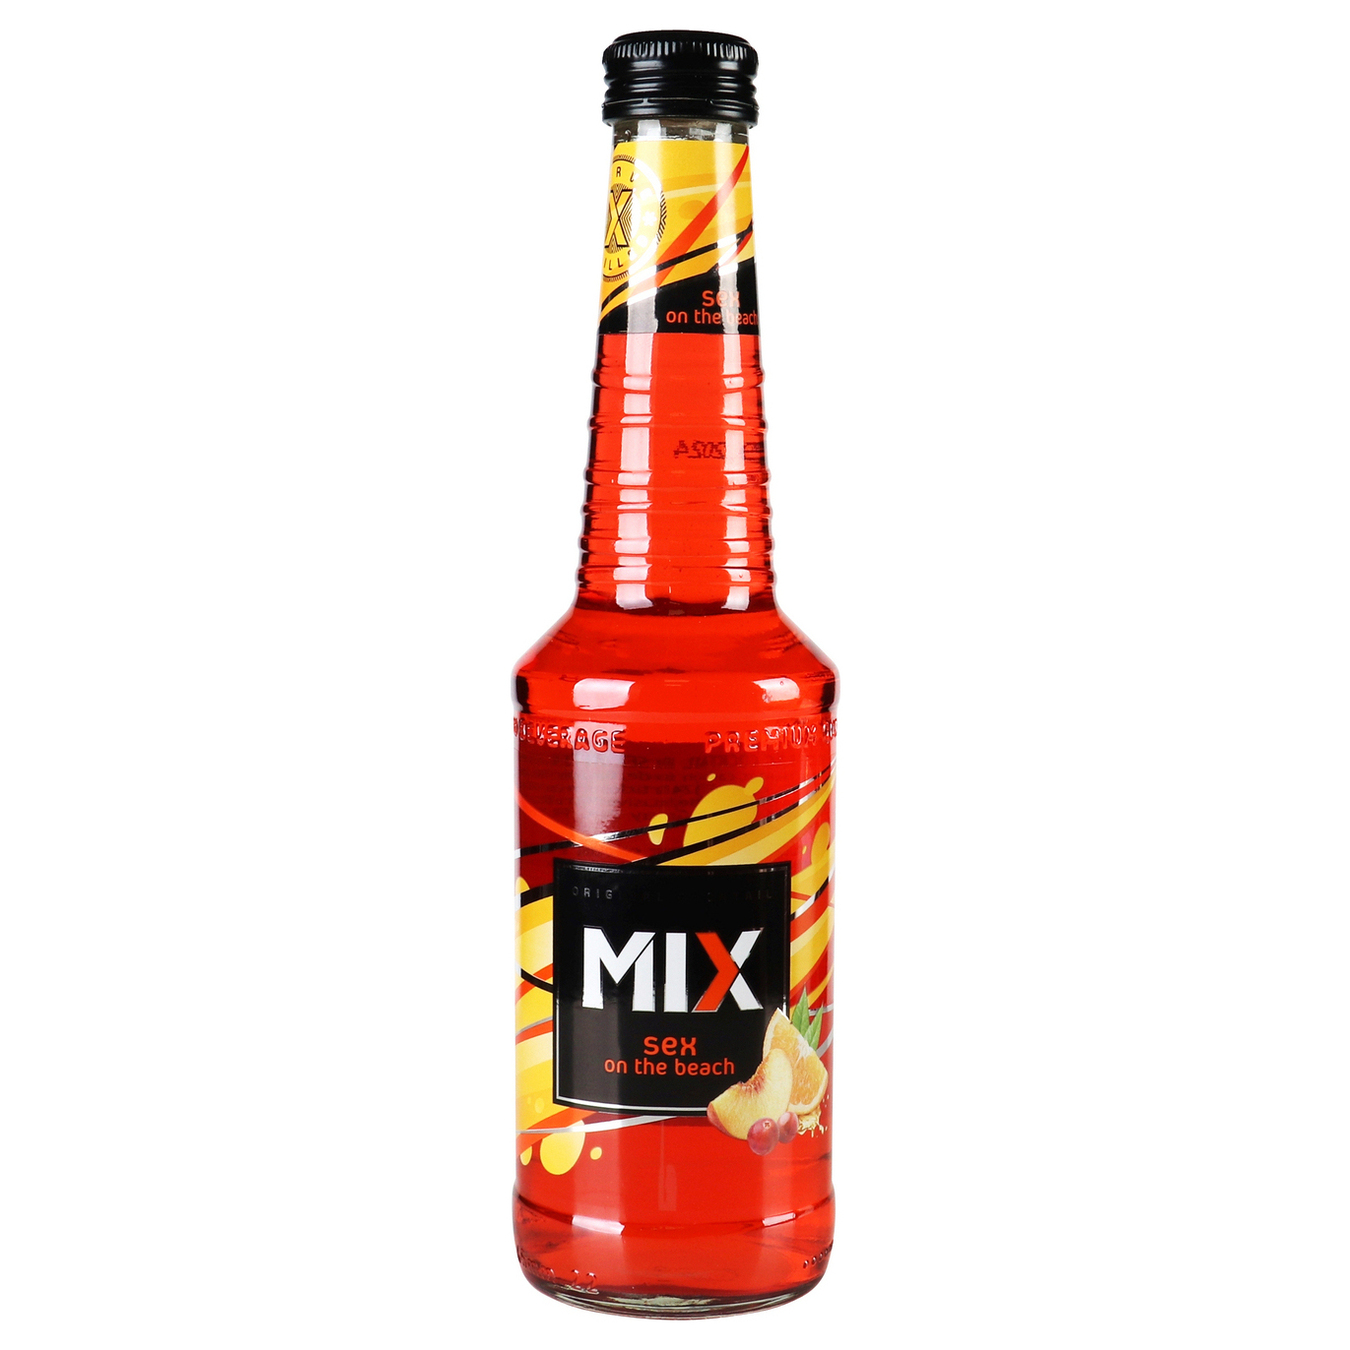 Drink MIX Sex on the beach 4% 0.33l s/pl